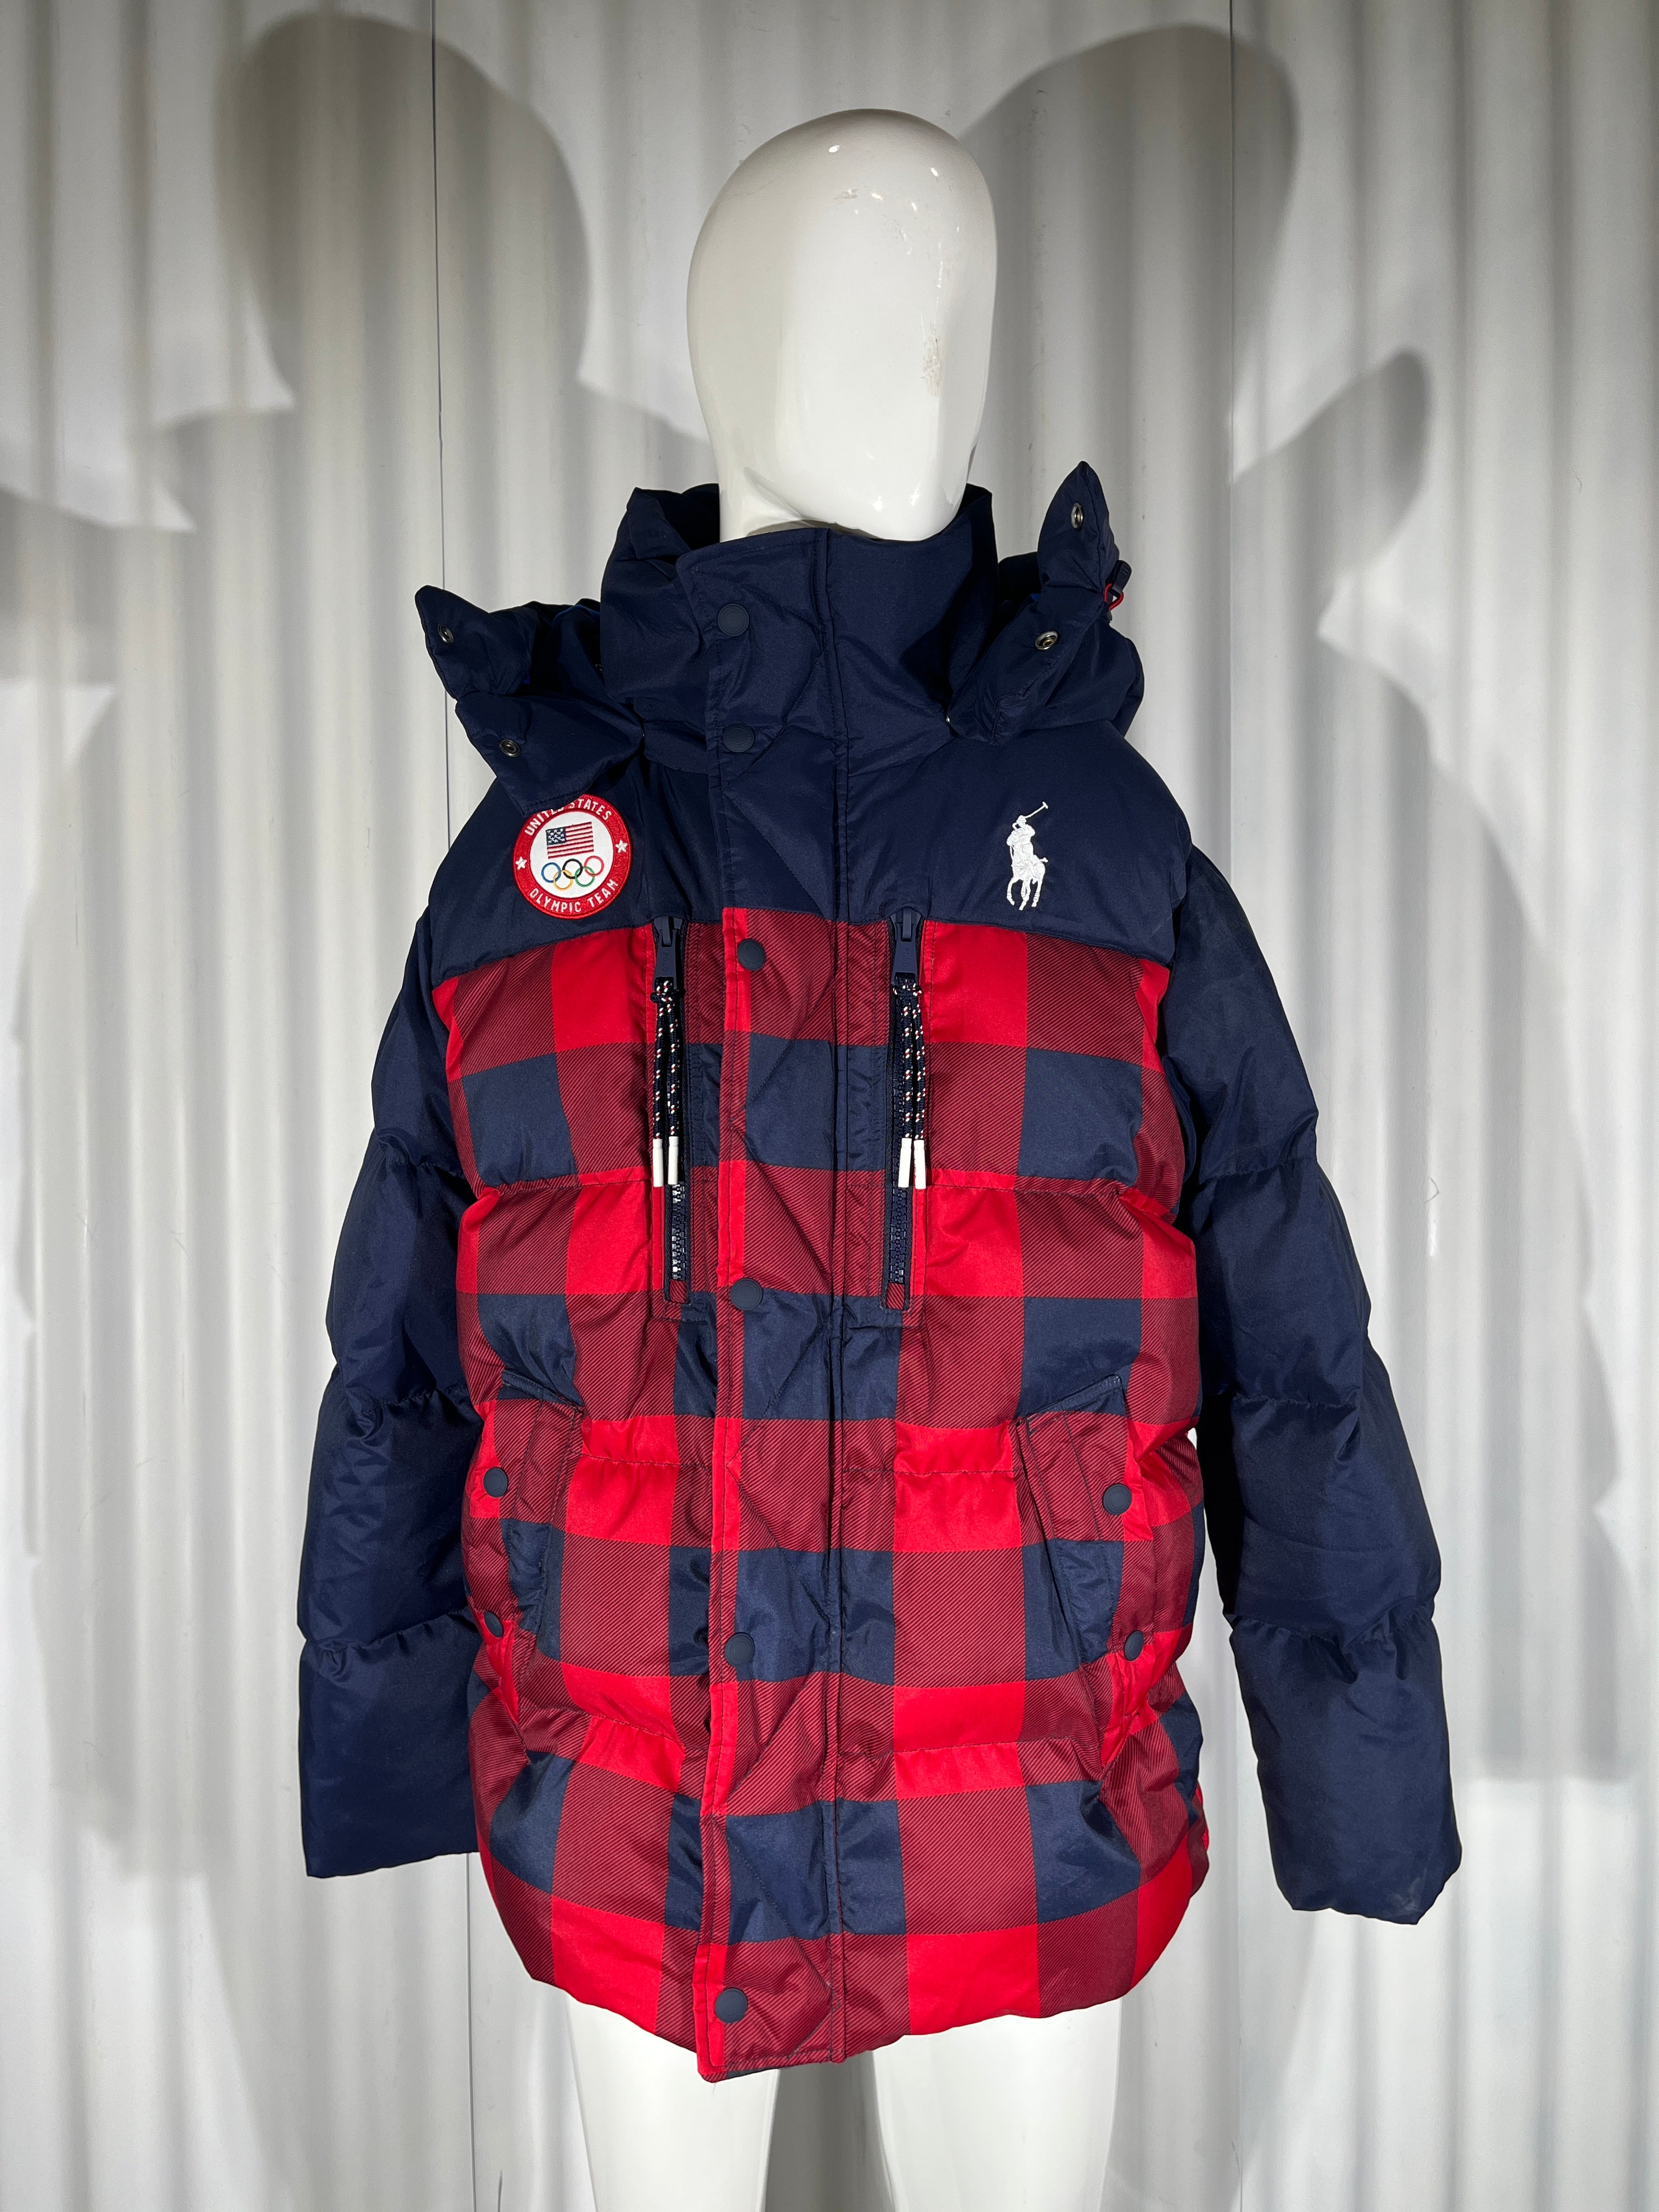 Polo Ralph Lauren X Beijing 2022 Olympic Down Union Jacket – The Locals Sale